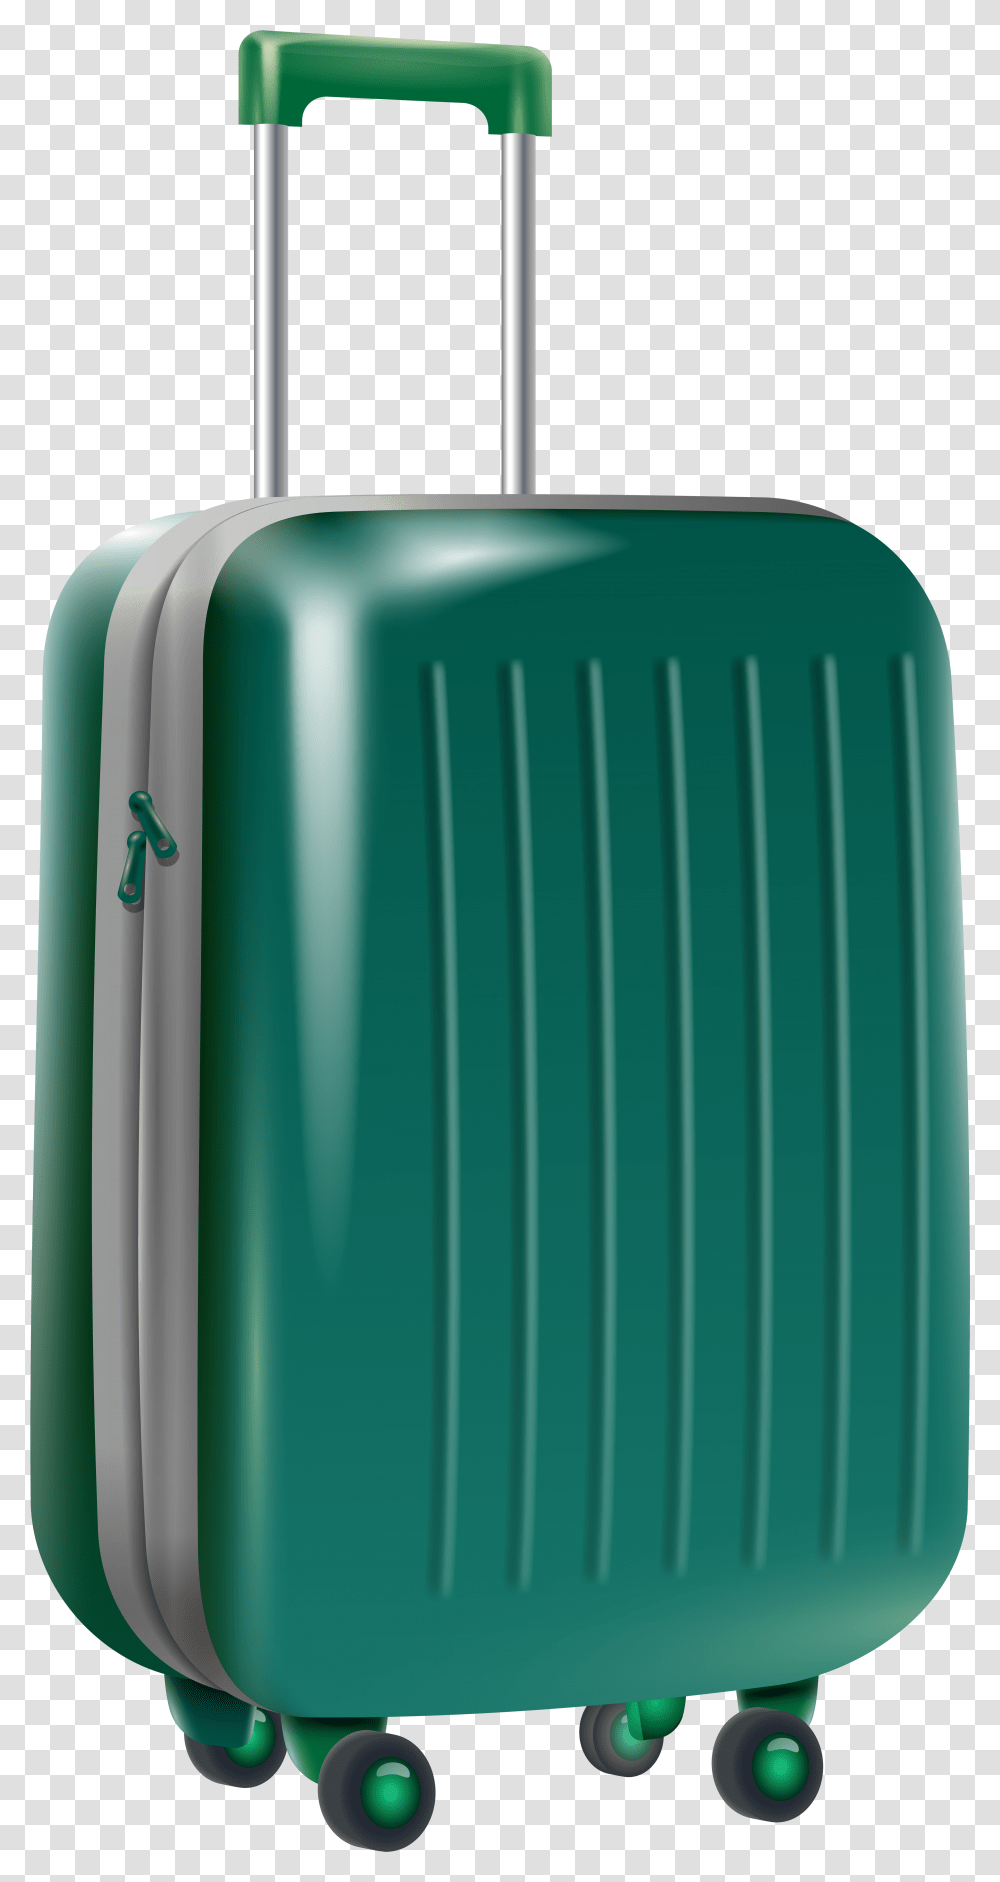 Suitcase Baggage Travel Trolley Bag, Luggage Transparent Png